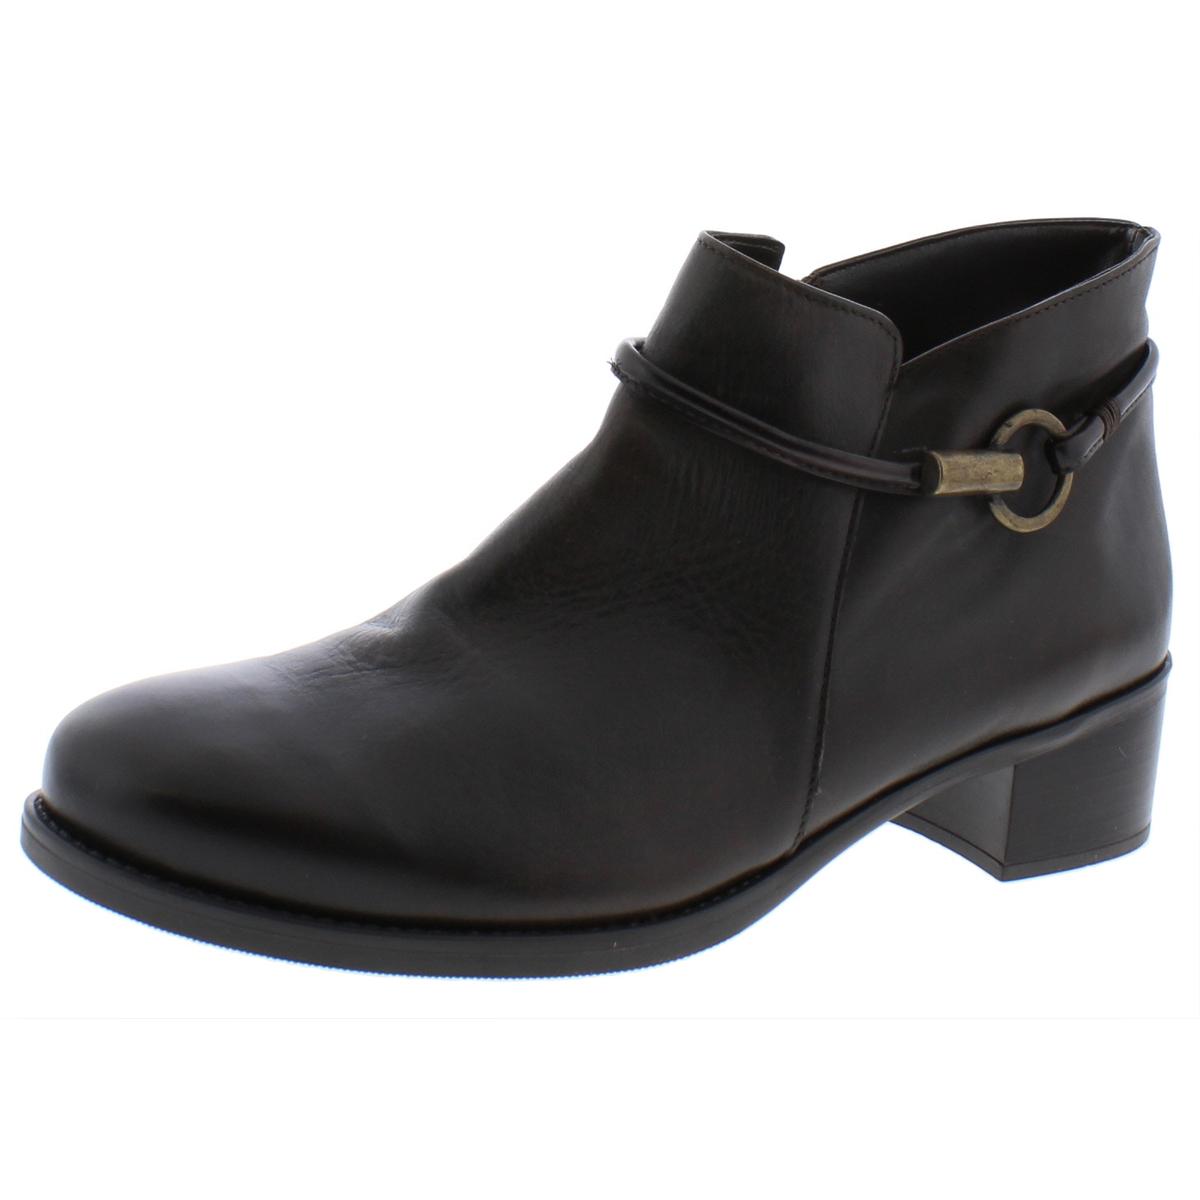 David Tate Womens Miller Brown Ankle Boots Shoes 13 Medium (B,M) BHFO ...